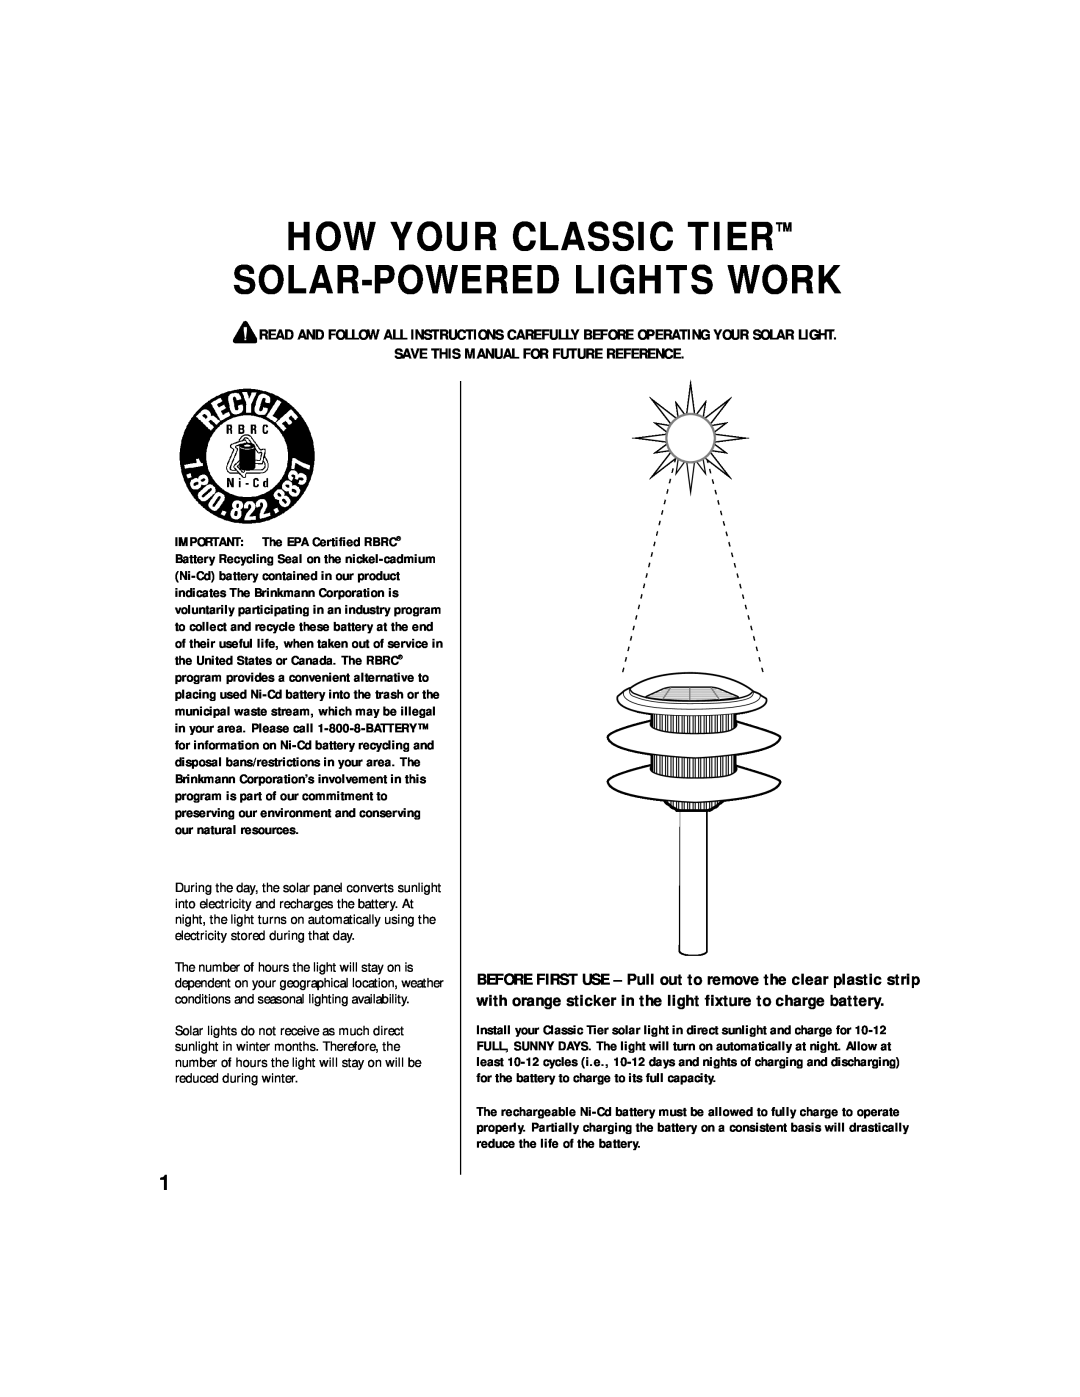 Brinkmann 822-0408-0, 822-0408-4 Save This Manual For Future Reference, How Your Classic Tiertm Solar-Poweredlights Work 